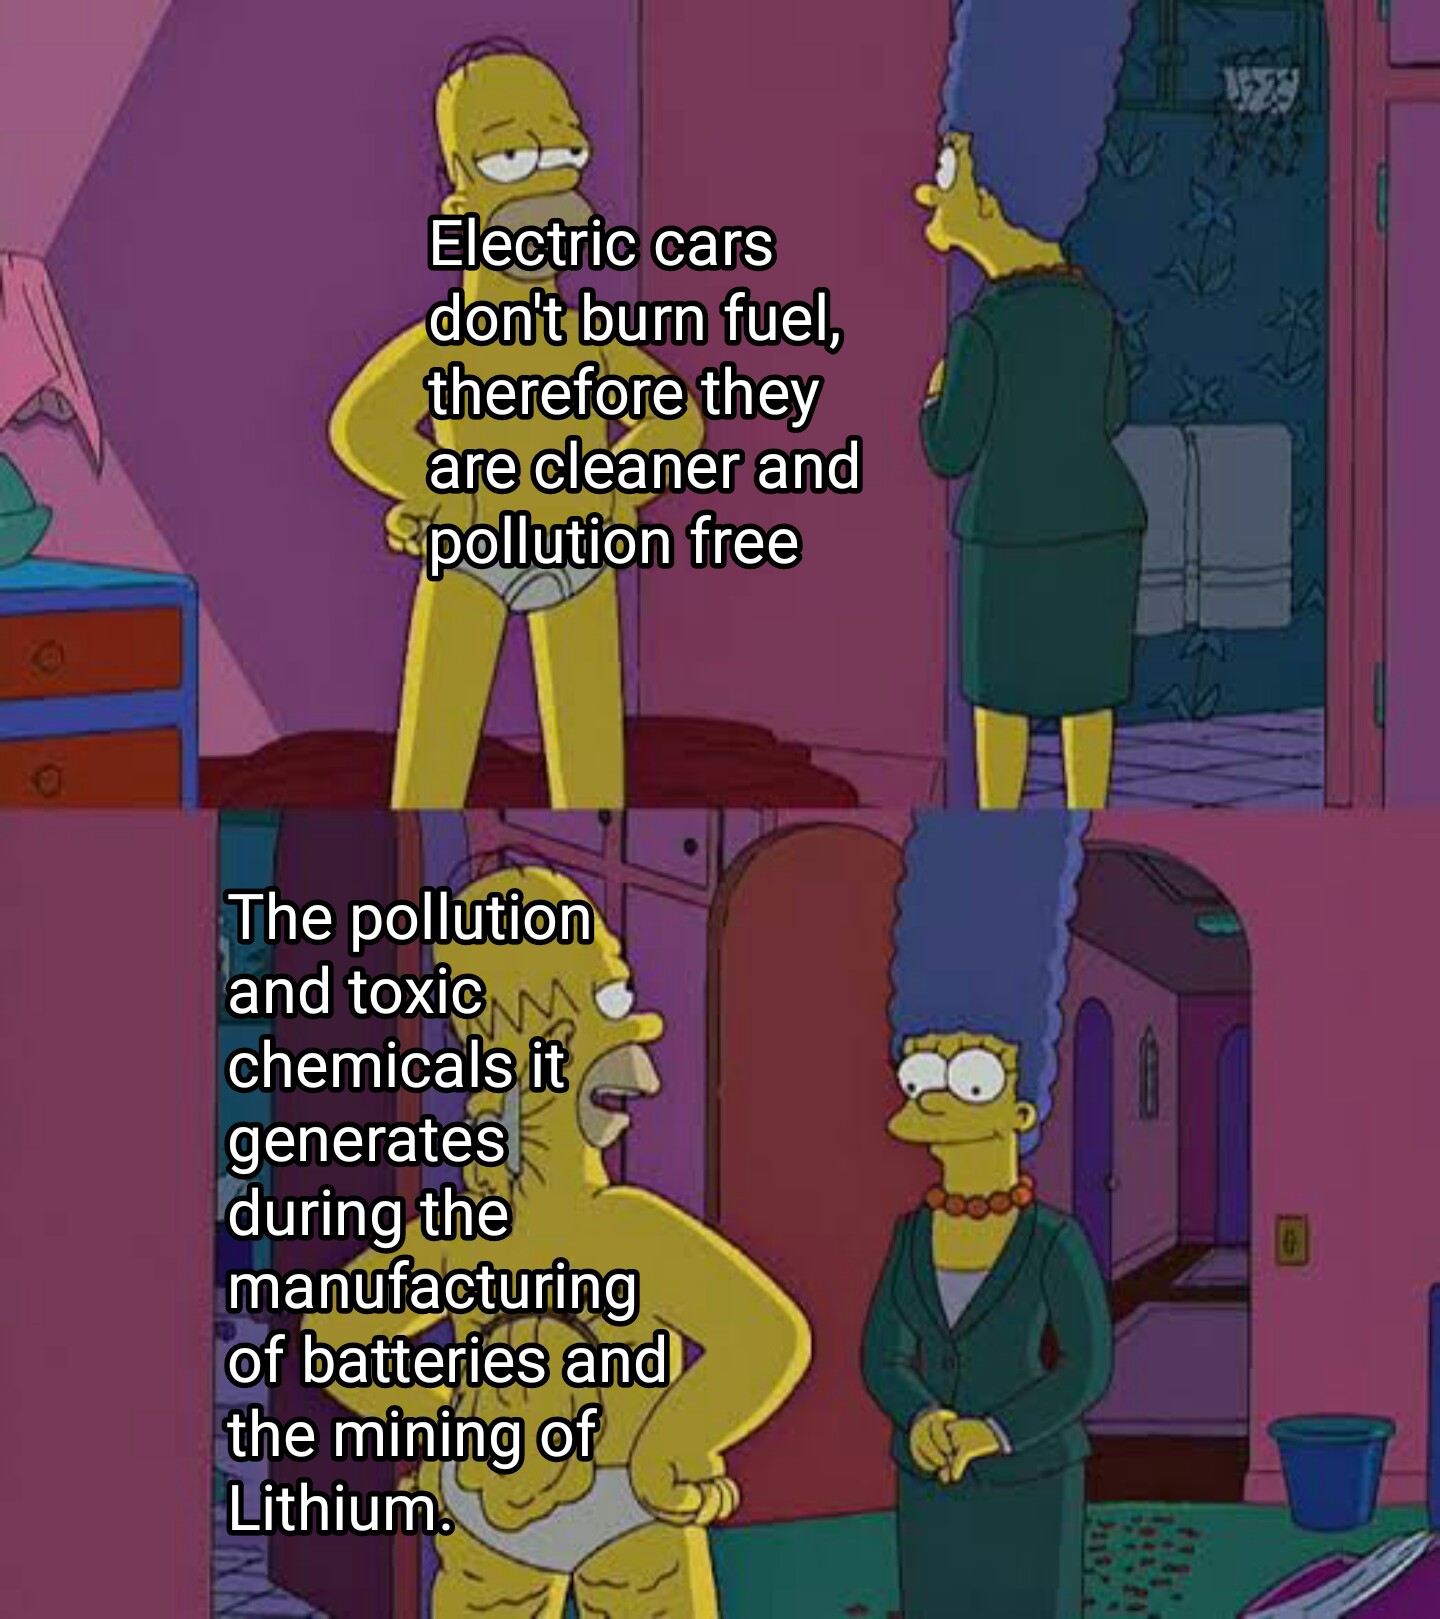 dank memes - funny memes - meme homer simpson - Electric cars don't burn fuel, therefore they are cleaner and pollution free The pollution and toxic chemicals it generates during the manufacturing of batteries and the mining of Lithium Inn